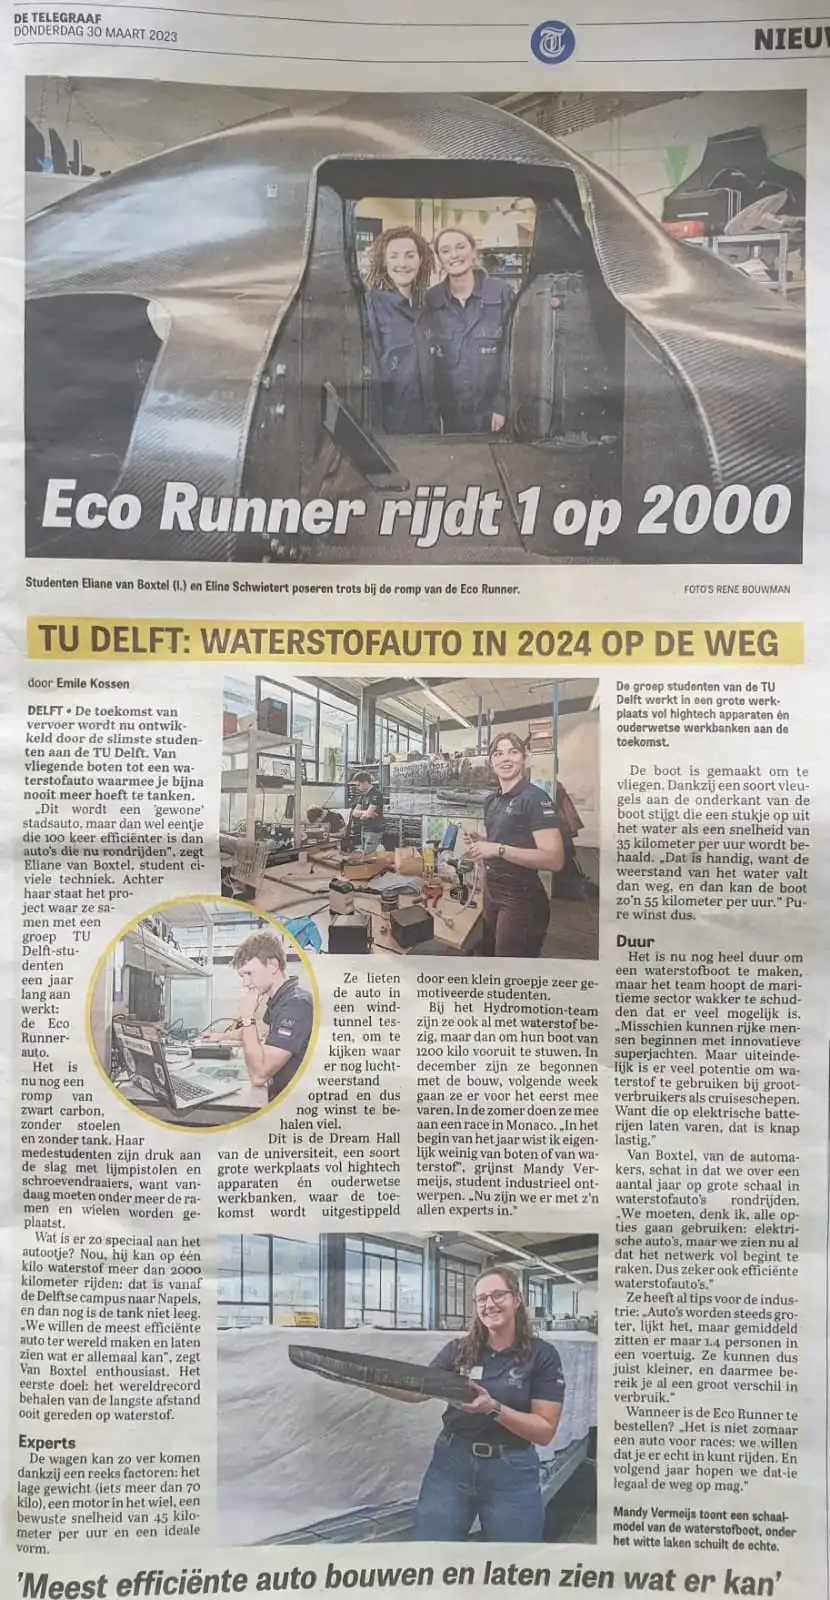 Eco-Runner Delft in Telegraaf of March 30th (2023) - Part 2